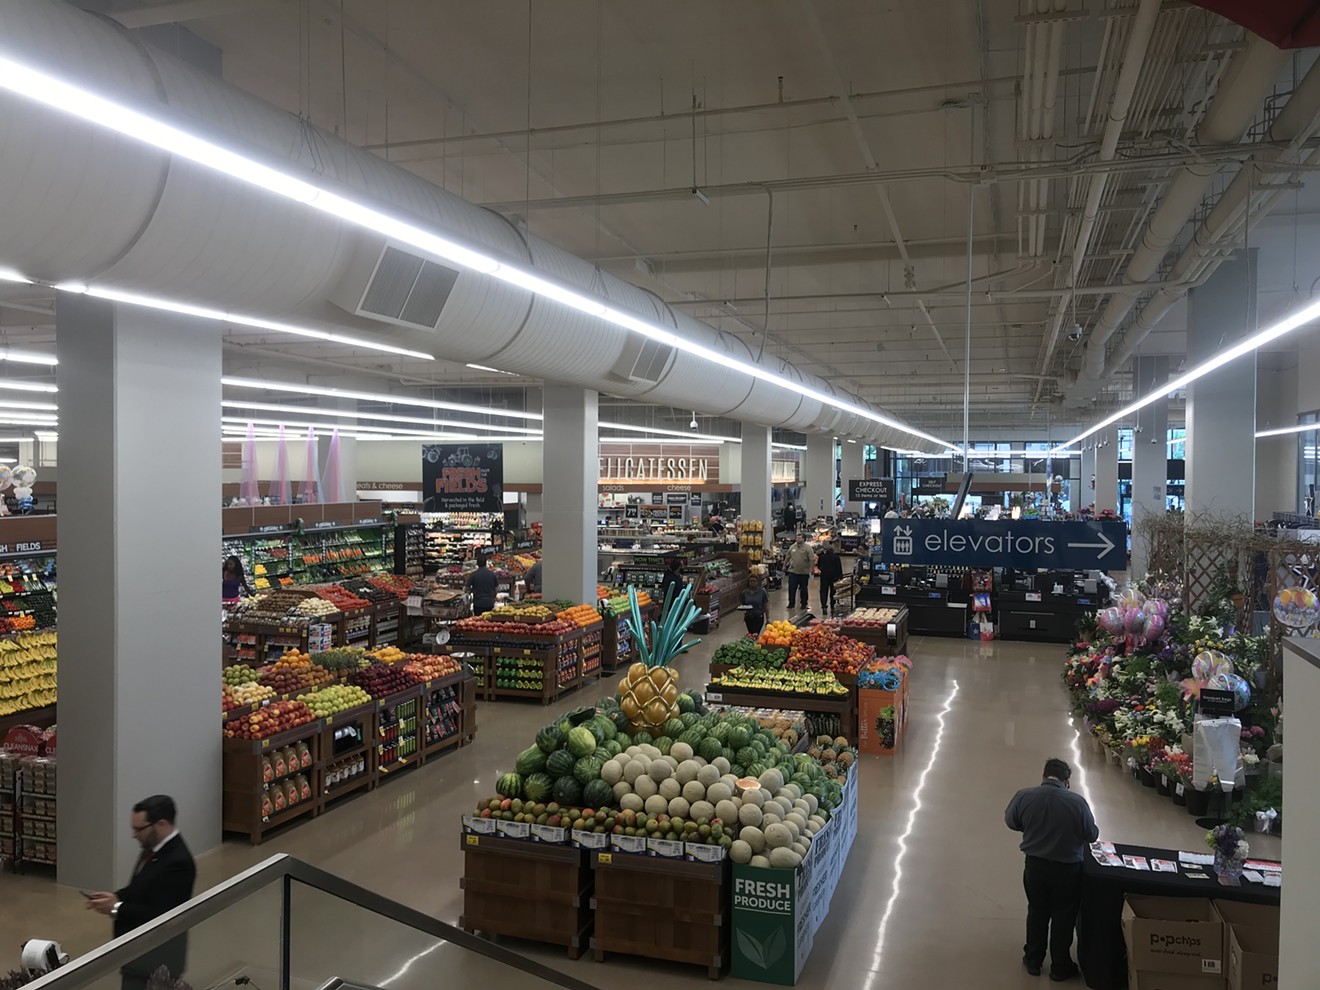 Tom Thumb's produce section, as seen from the second floor.